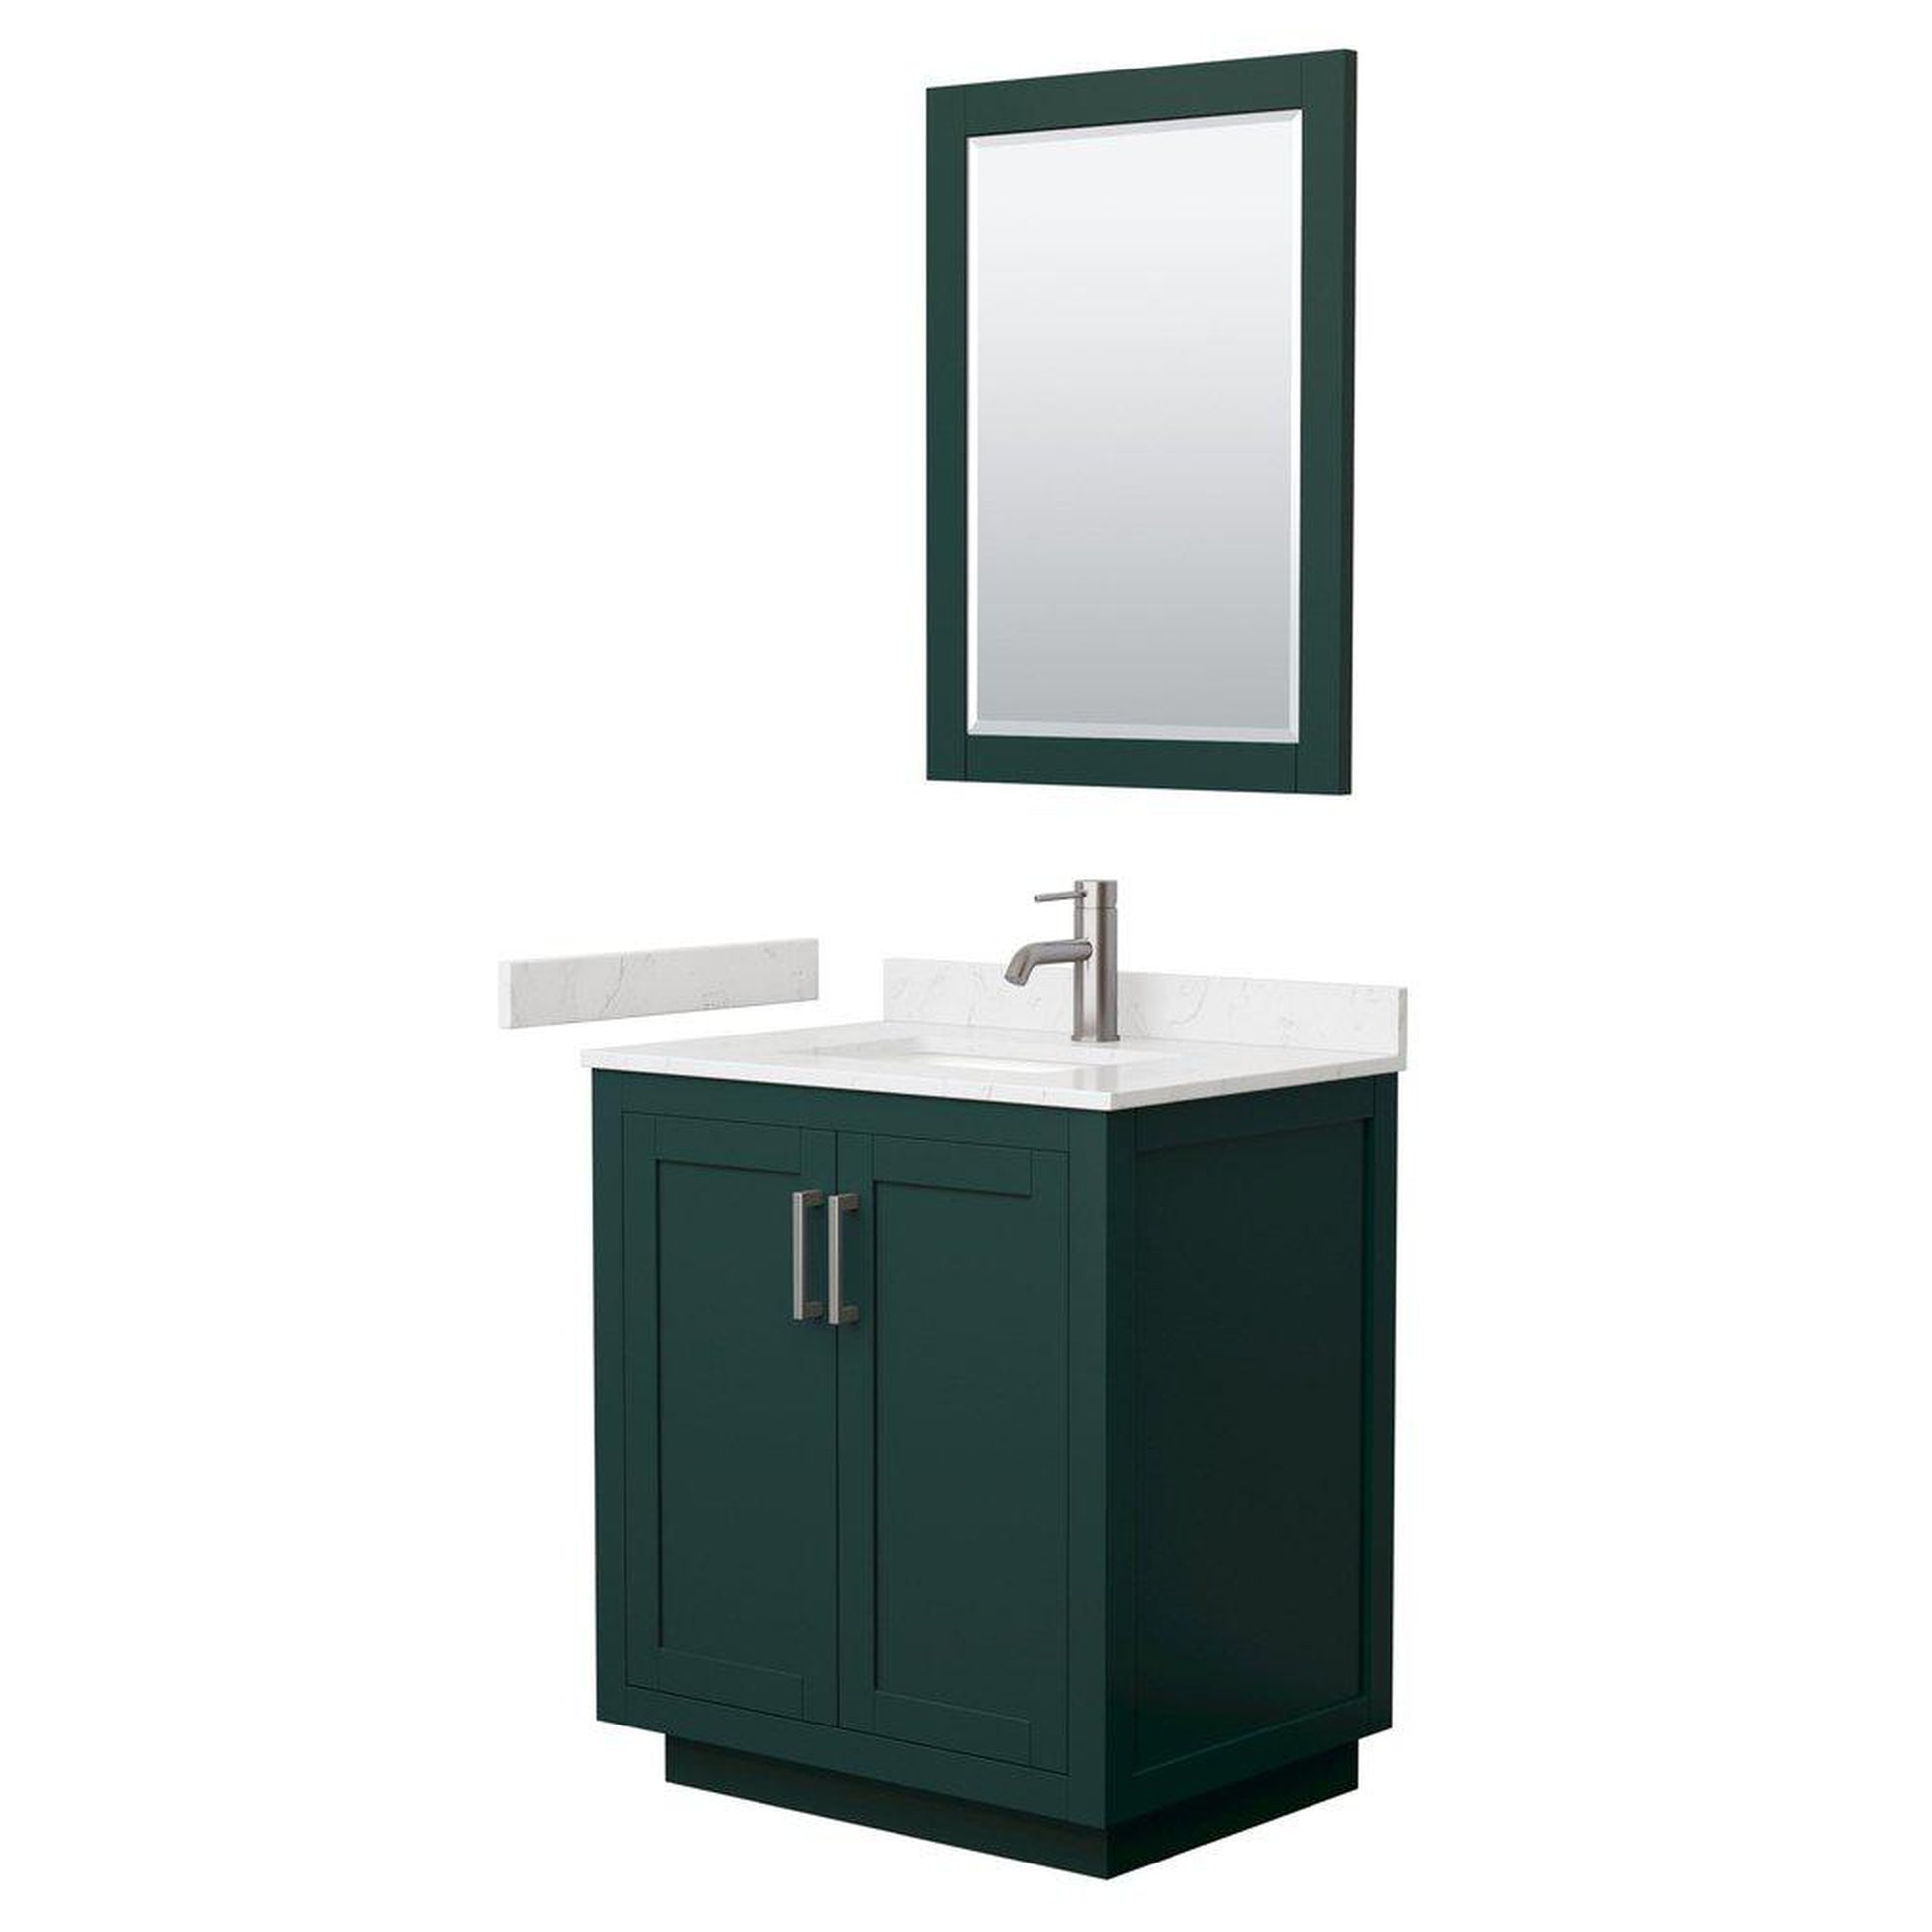 Wyndham Collection Miranda 30" Single Bathroom Green Vanity Set With Light-Vein Carrara Cultured Marble Countertop, Undermount Square Sink, 24" Mirror And Brushed Nickel Trim